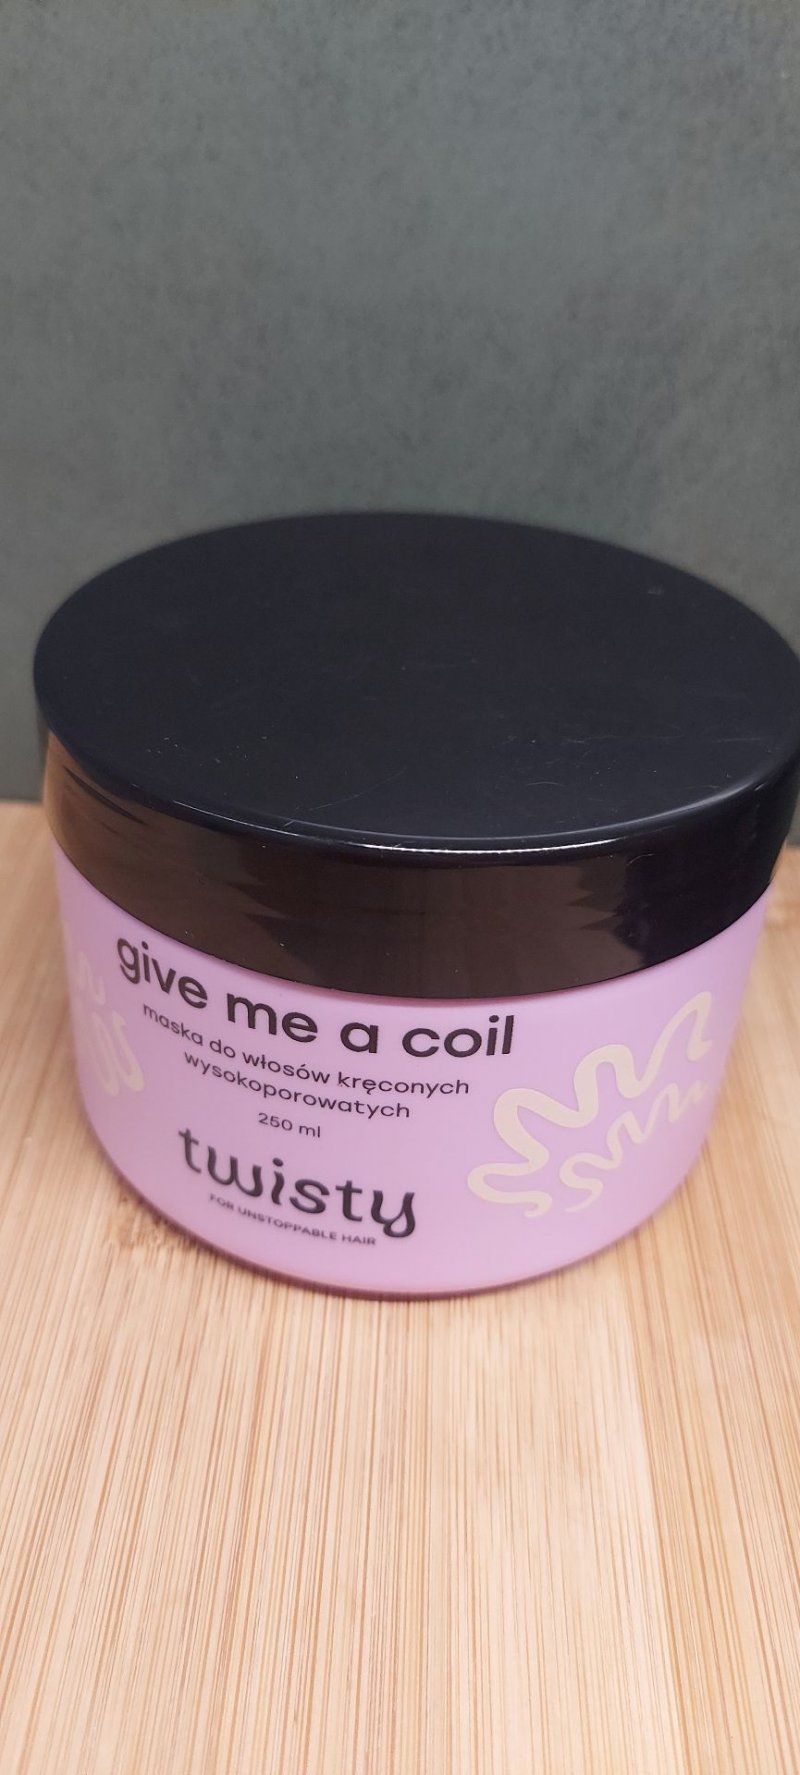 Twisty, Give Me a Coil, mask for high porosity hair